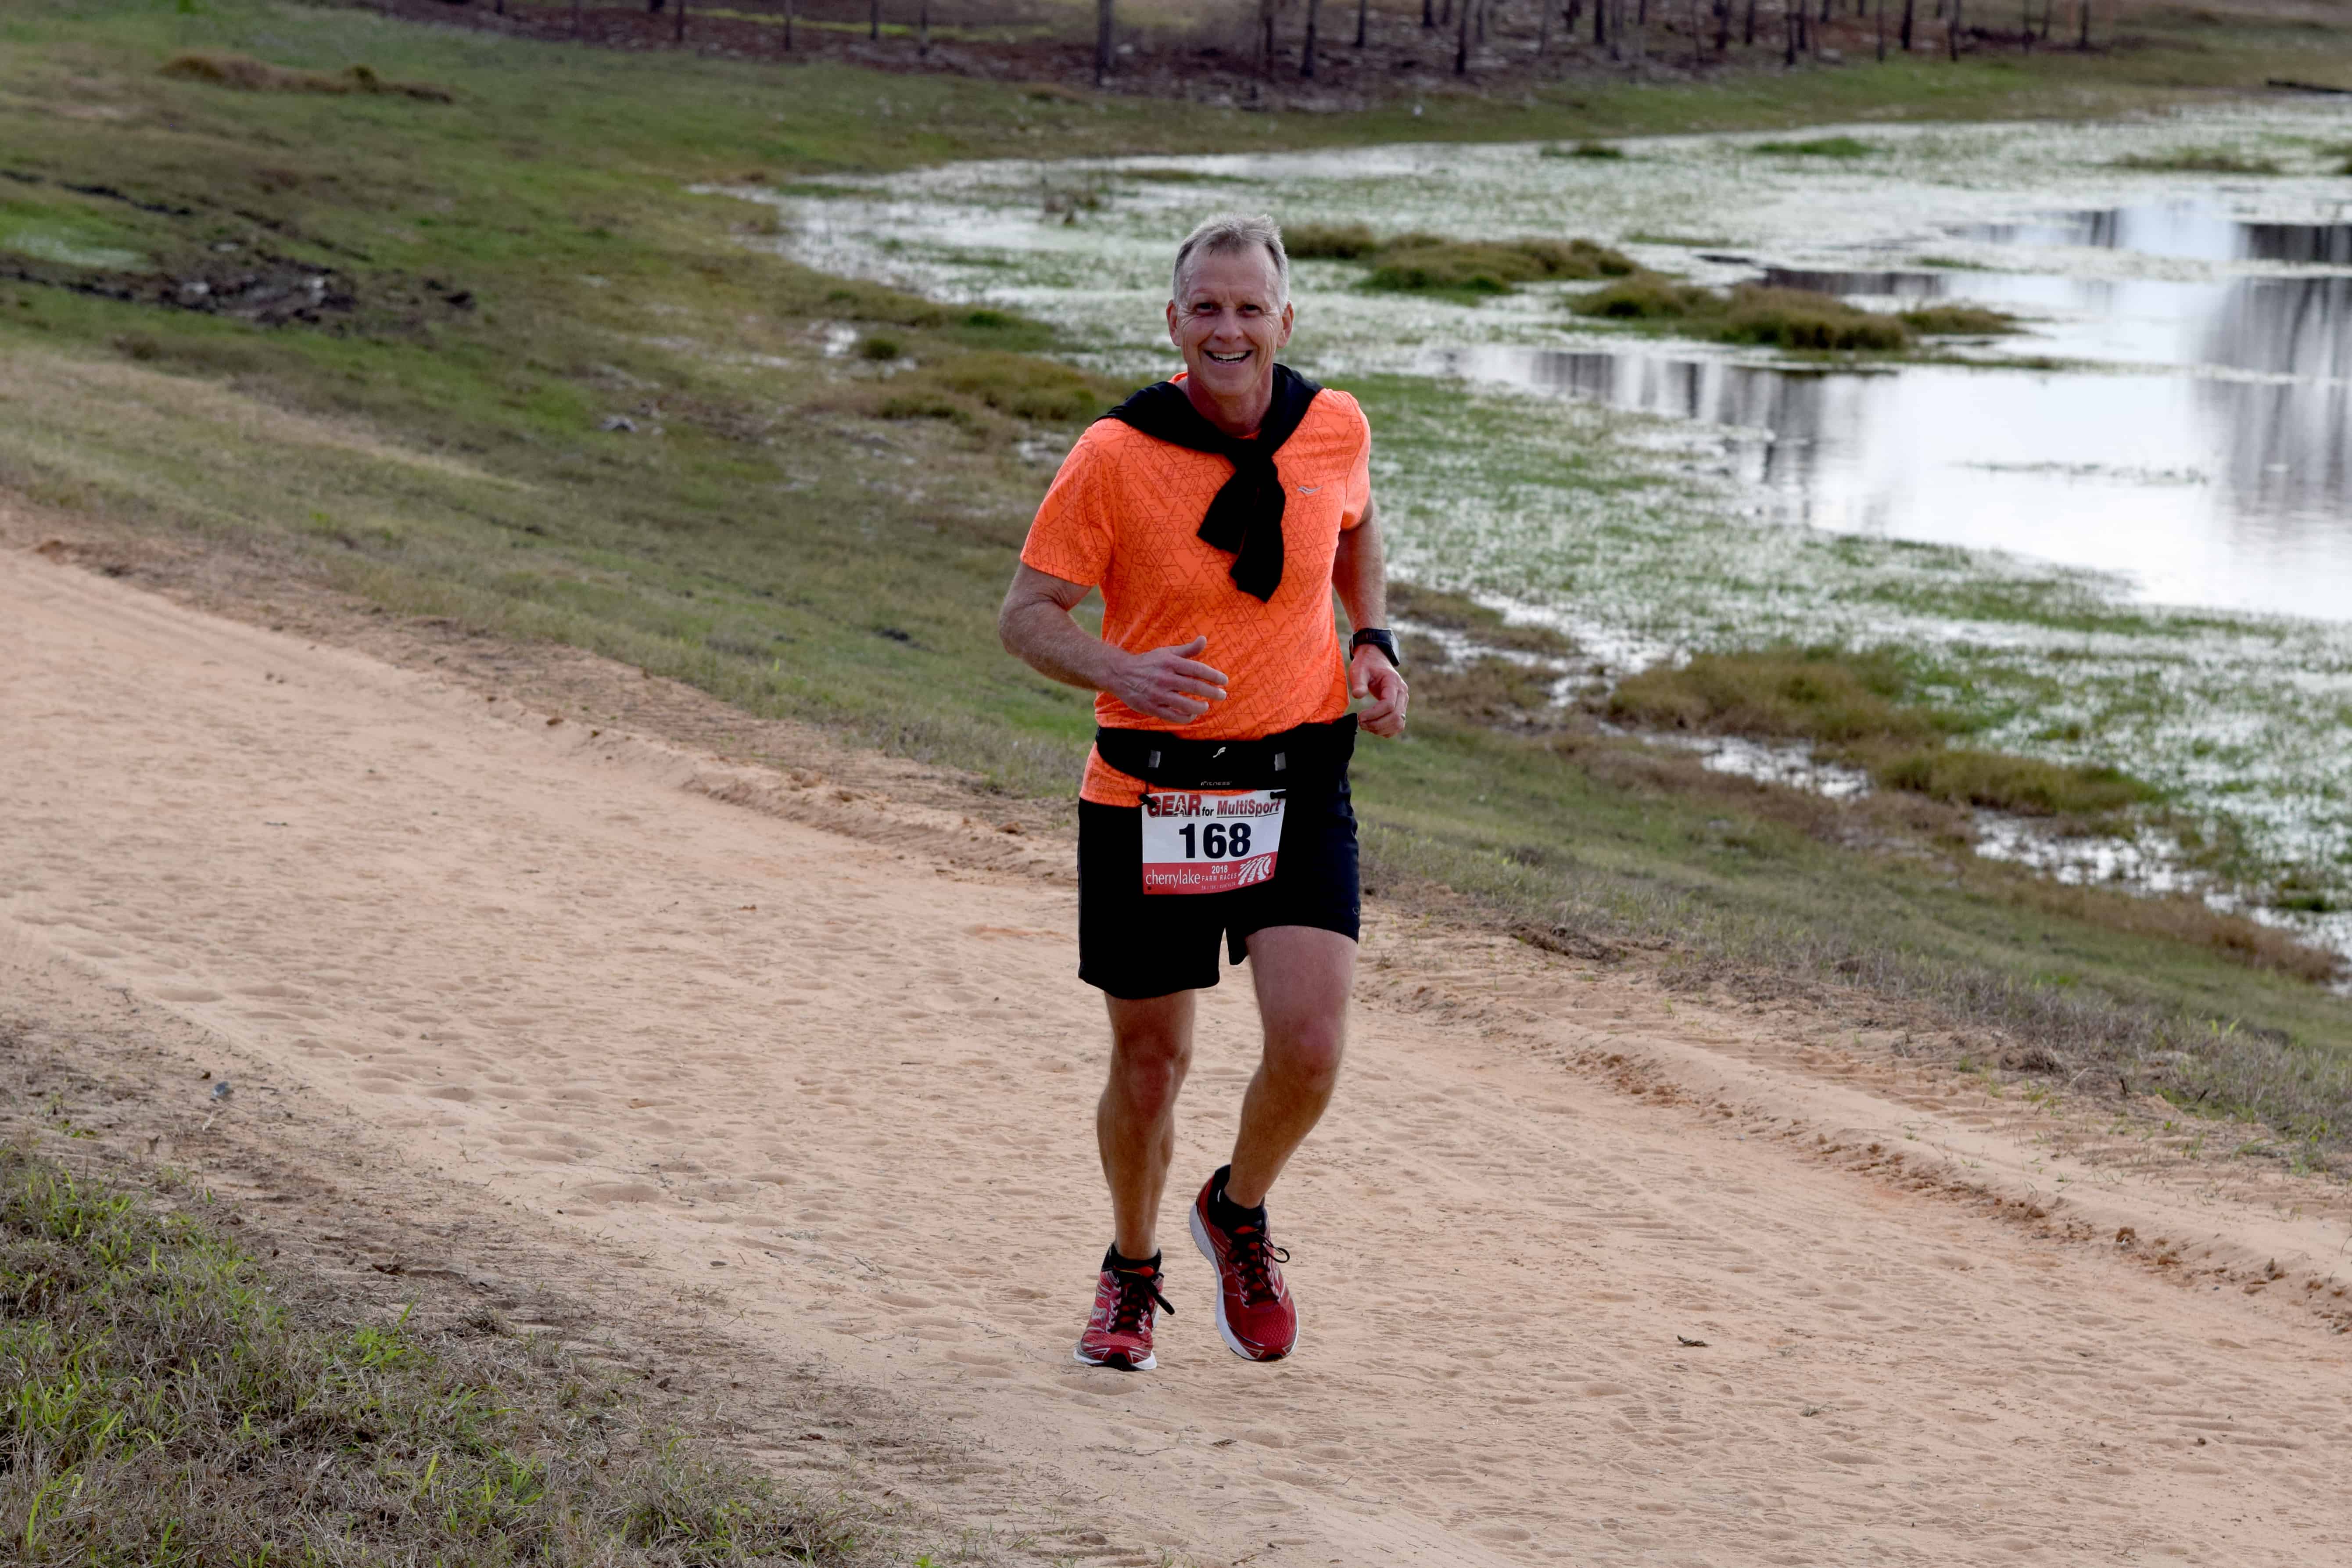 A man in an orange shirt smiles as he runs on an off-road path by a lake.